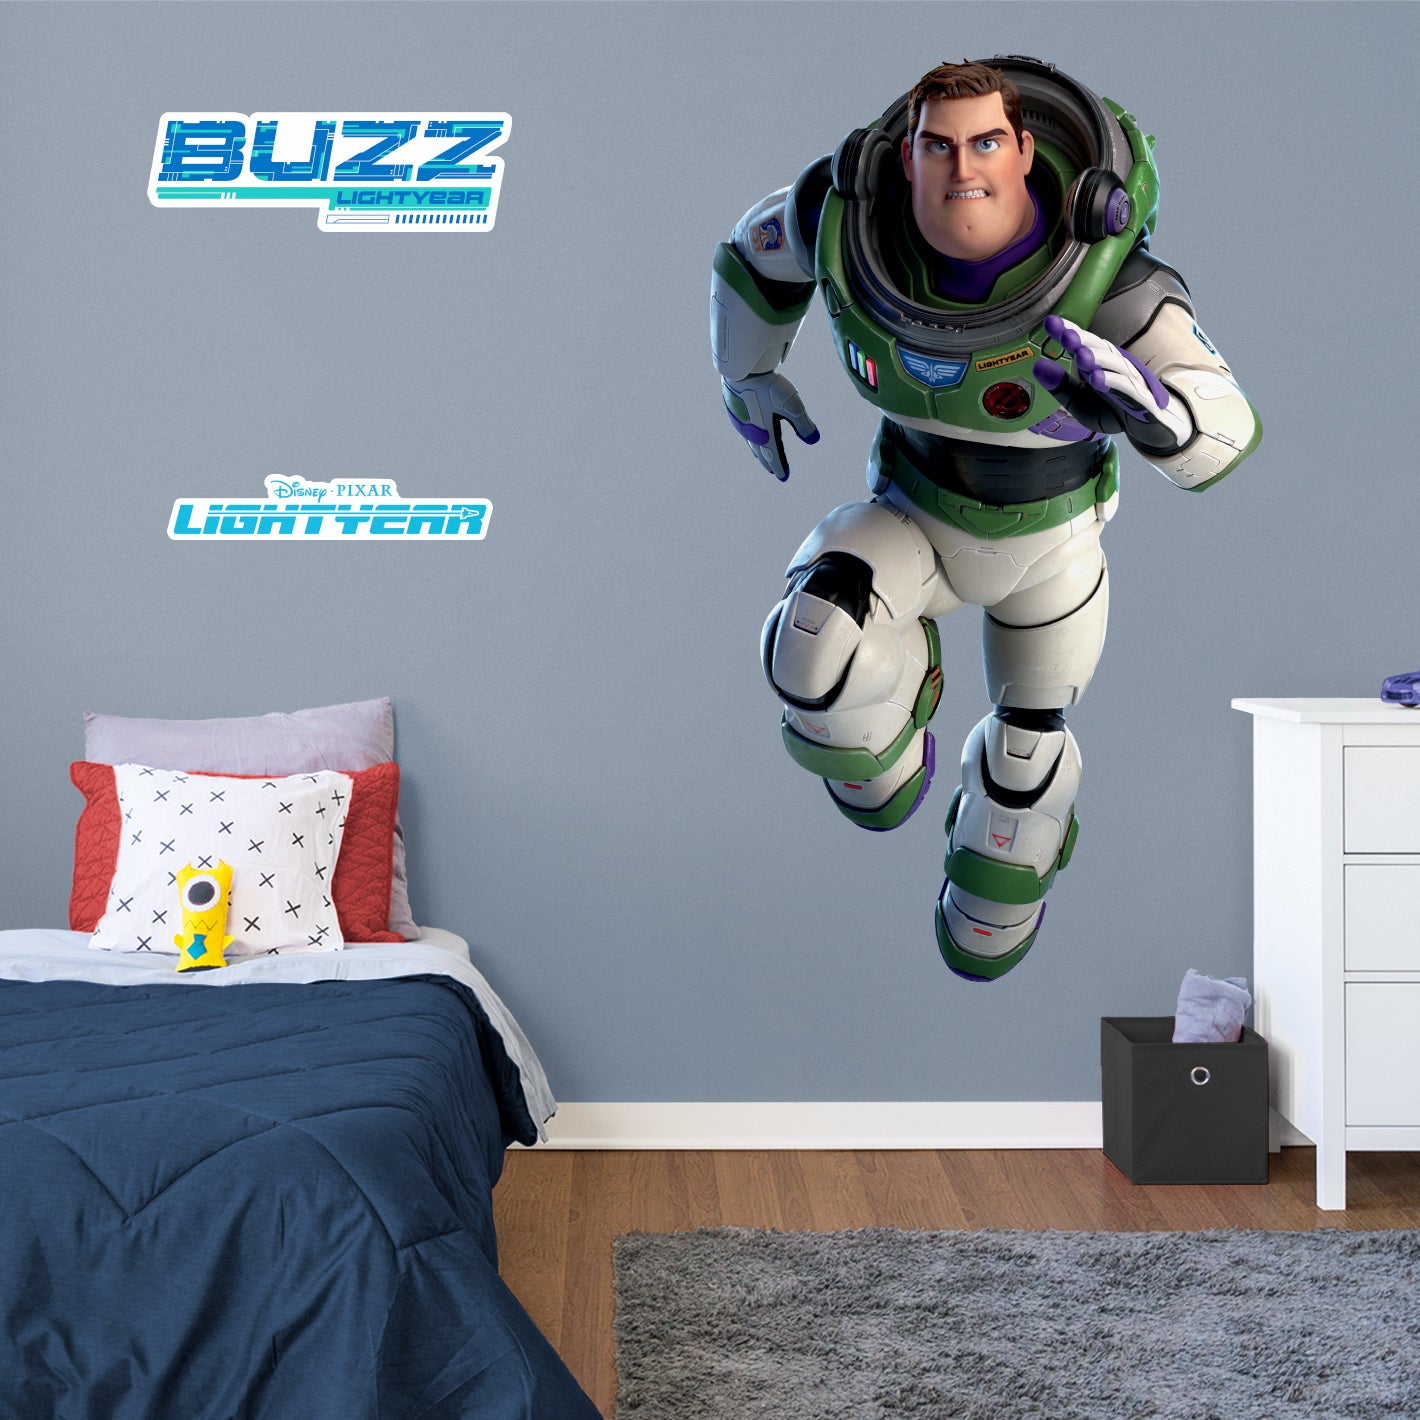 Lightyear: Buzz Lightyear Alpha Suit RealBig - Officially Licensed Disney Removable Adhesive Decal